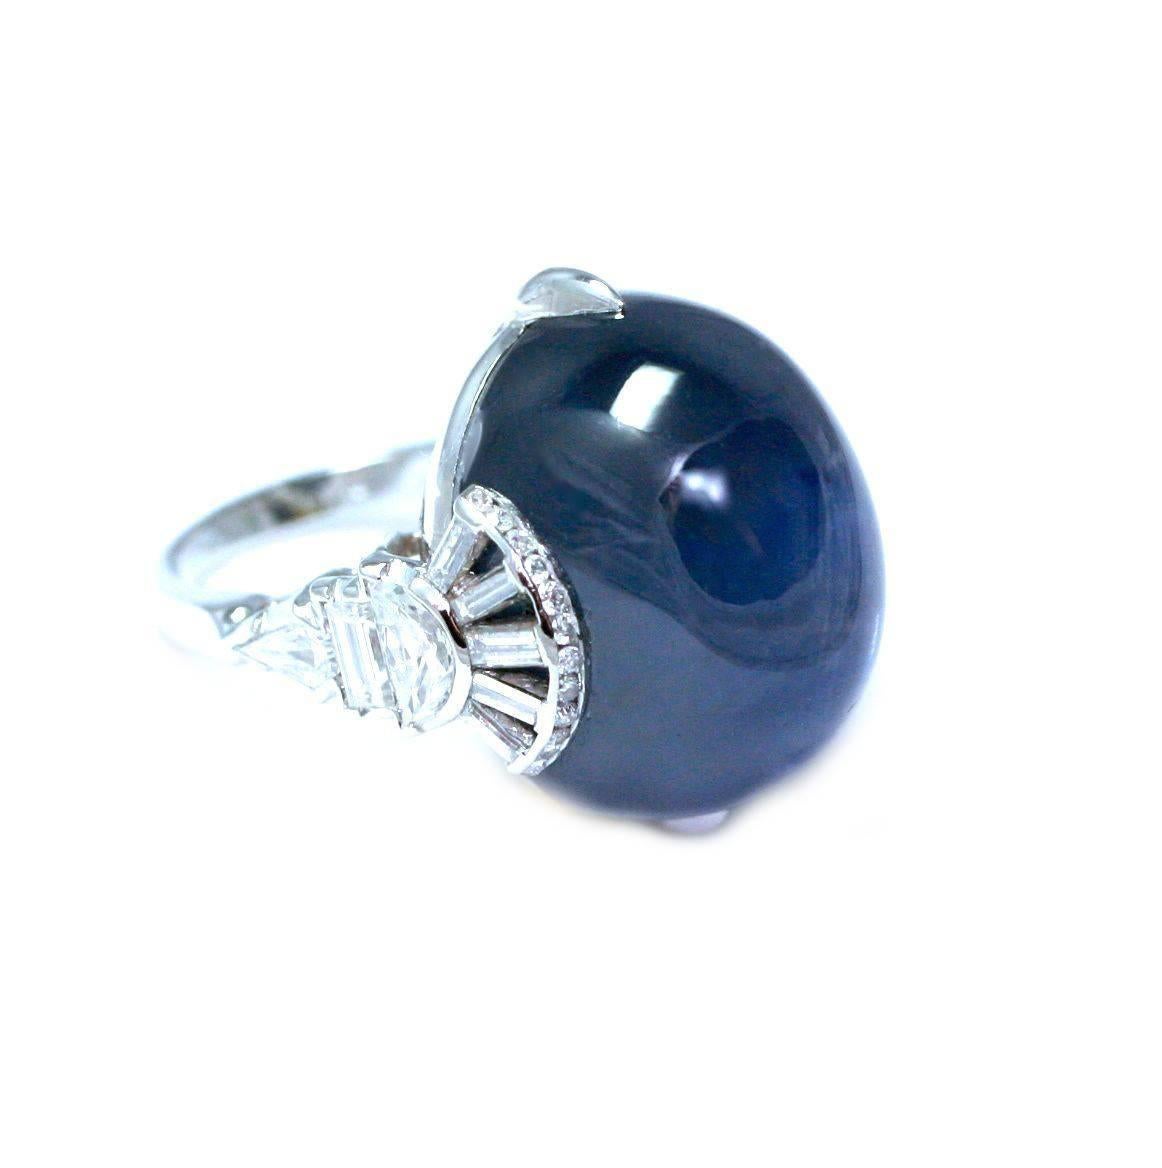 ART DECO Ring set with a cabochon star sapphire, mounting in platinum set with diamonds, ring size 4 3/4  (23,9 grams)